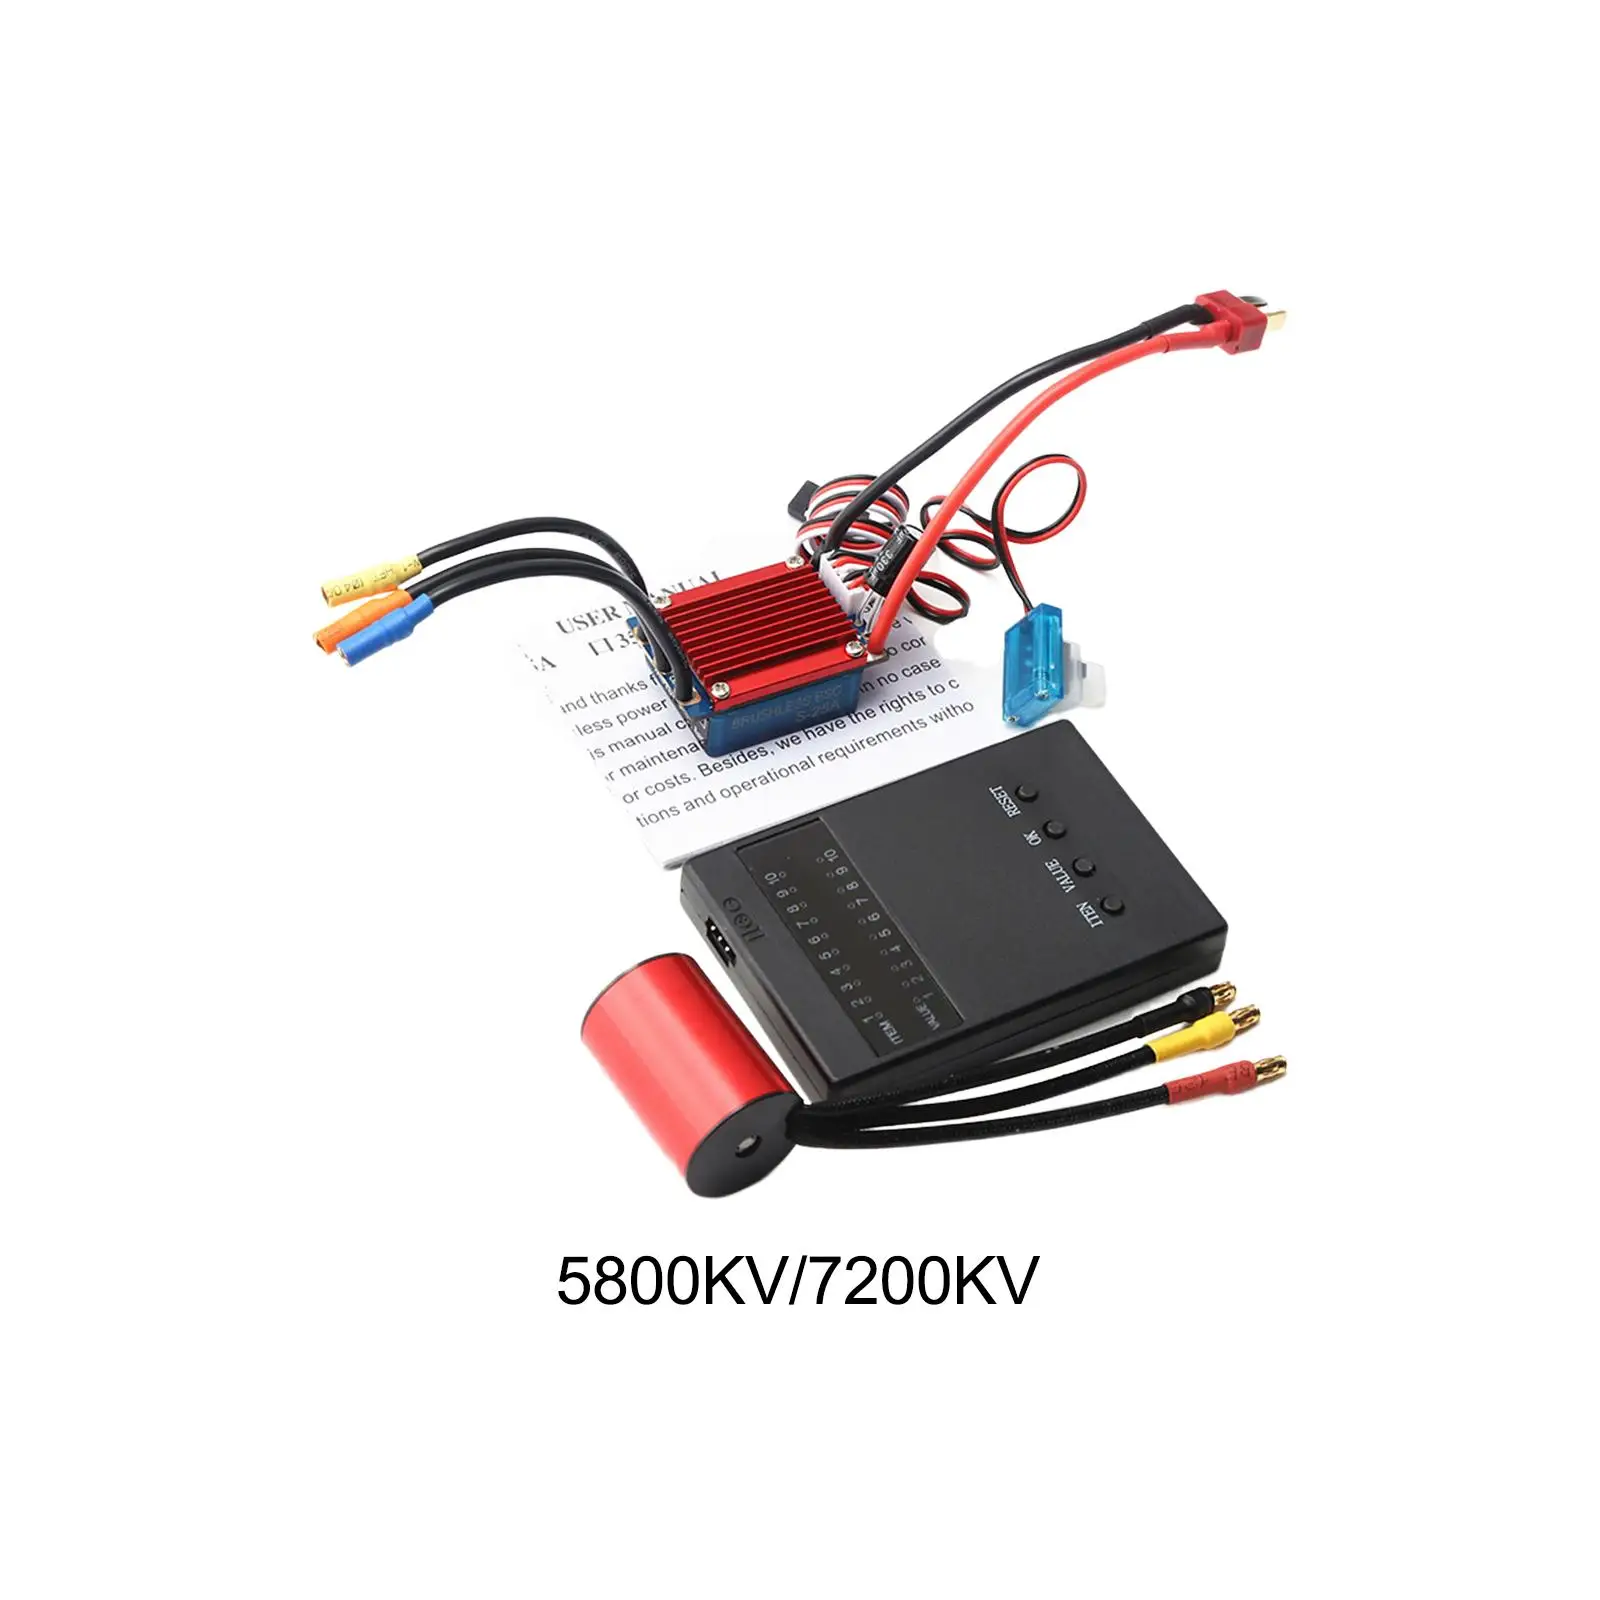 

2430 Brushless Motor 25A ESC Combo for 1/12 1/14 RC Truck Accessoies Replaces